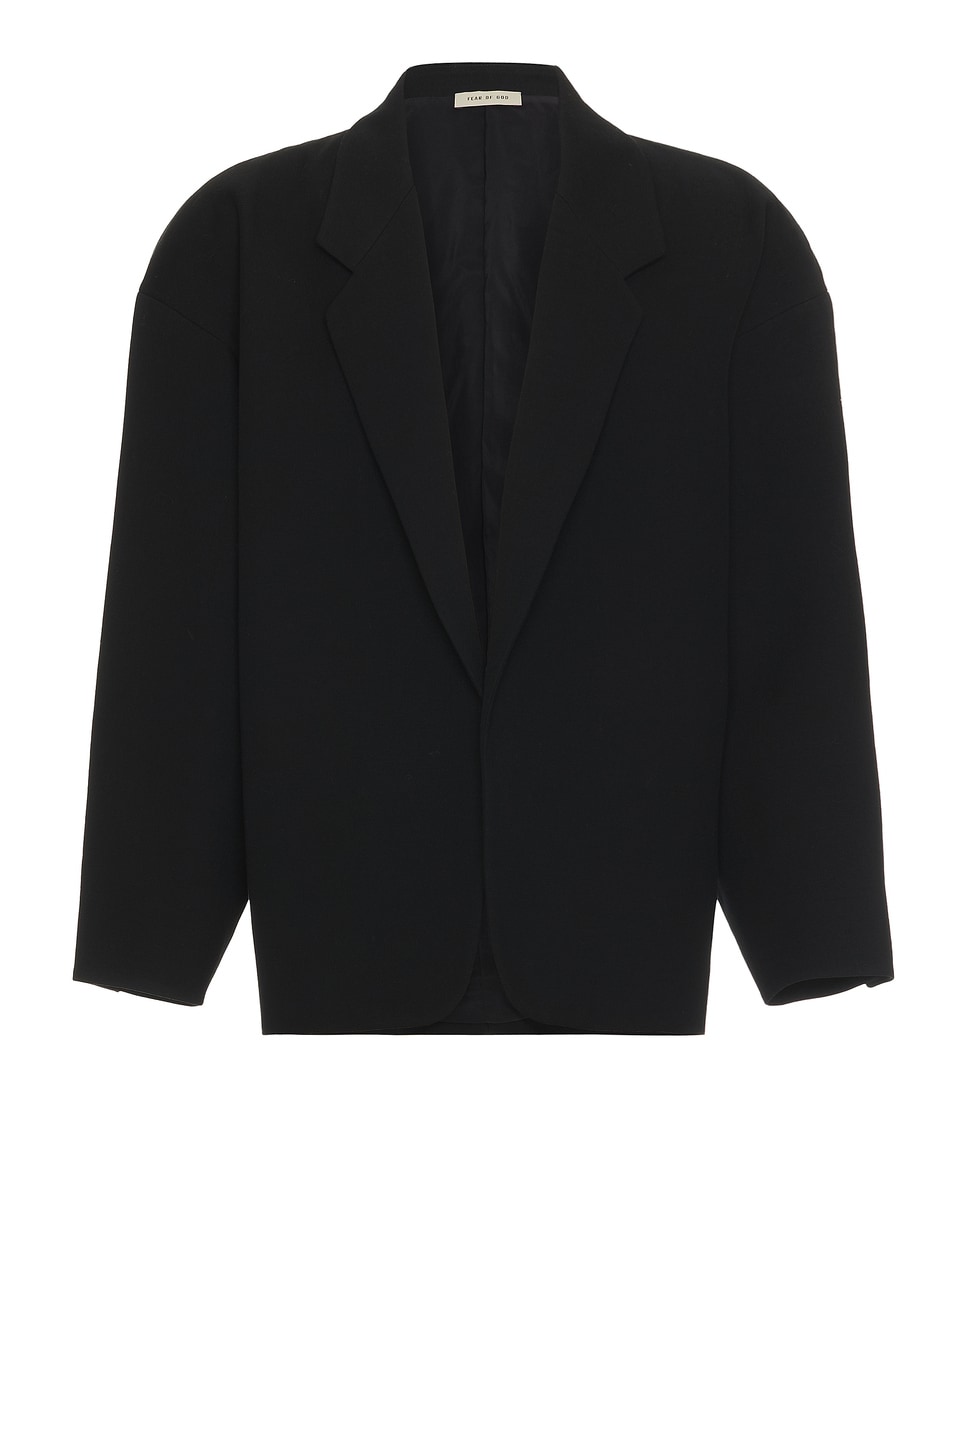 Image 1 of Fear of God Double Wool 8th California Blazer in Black